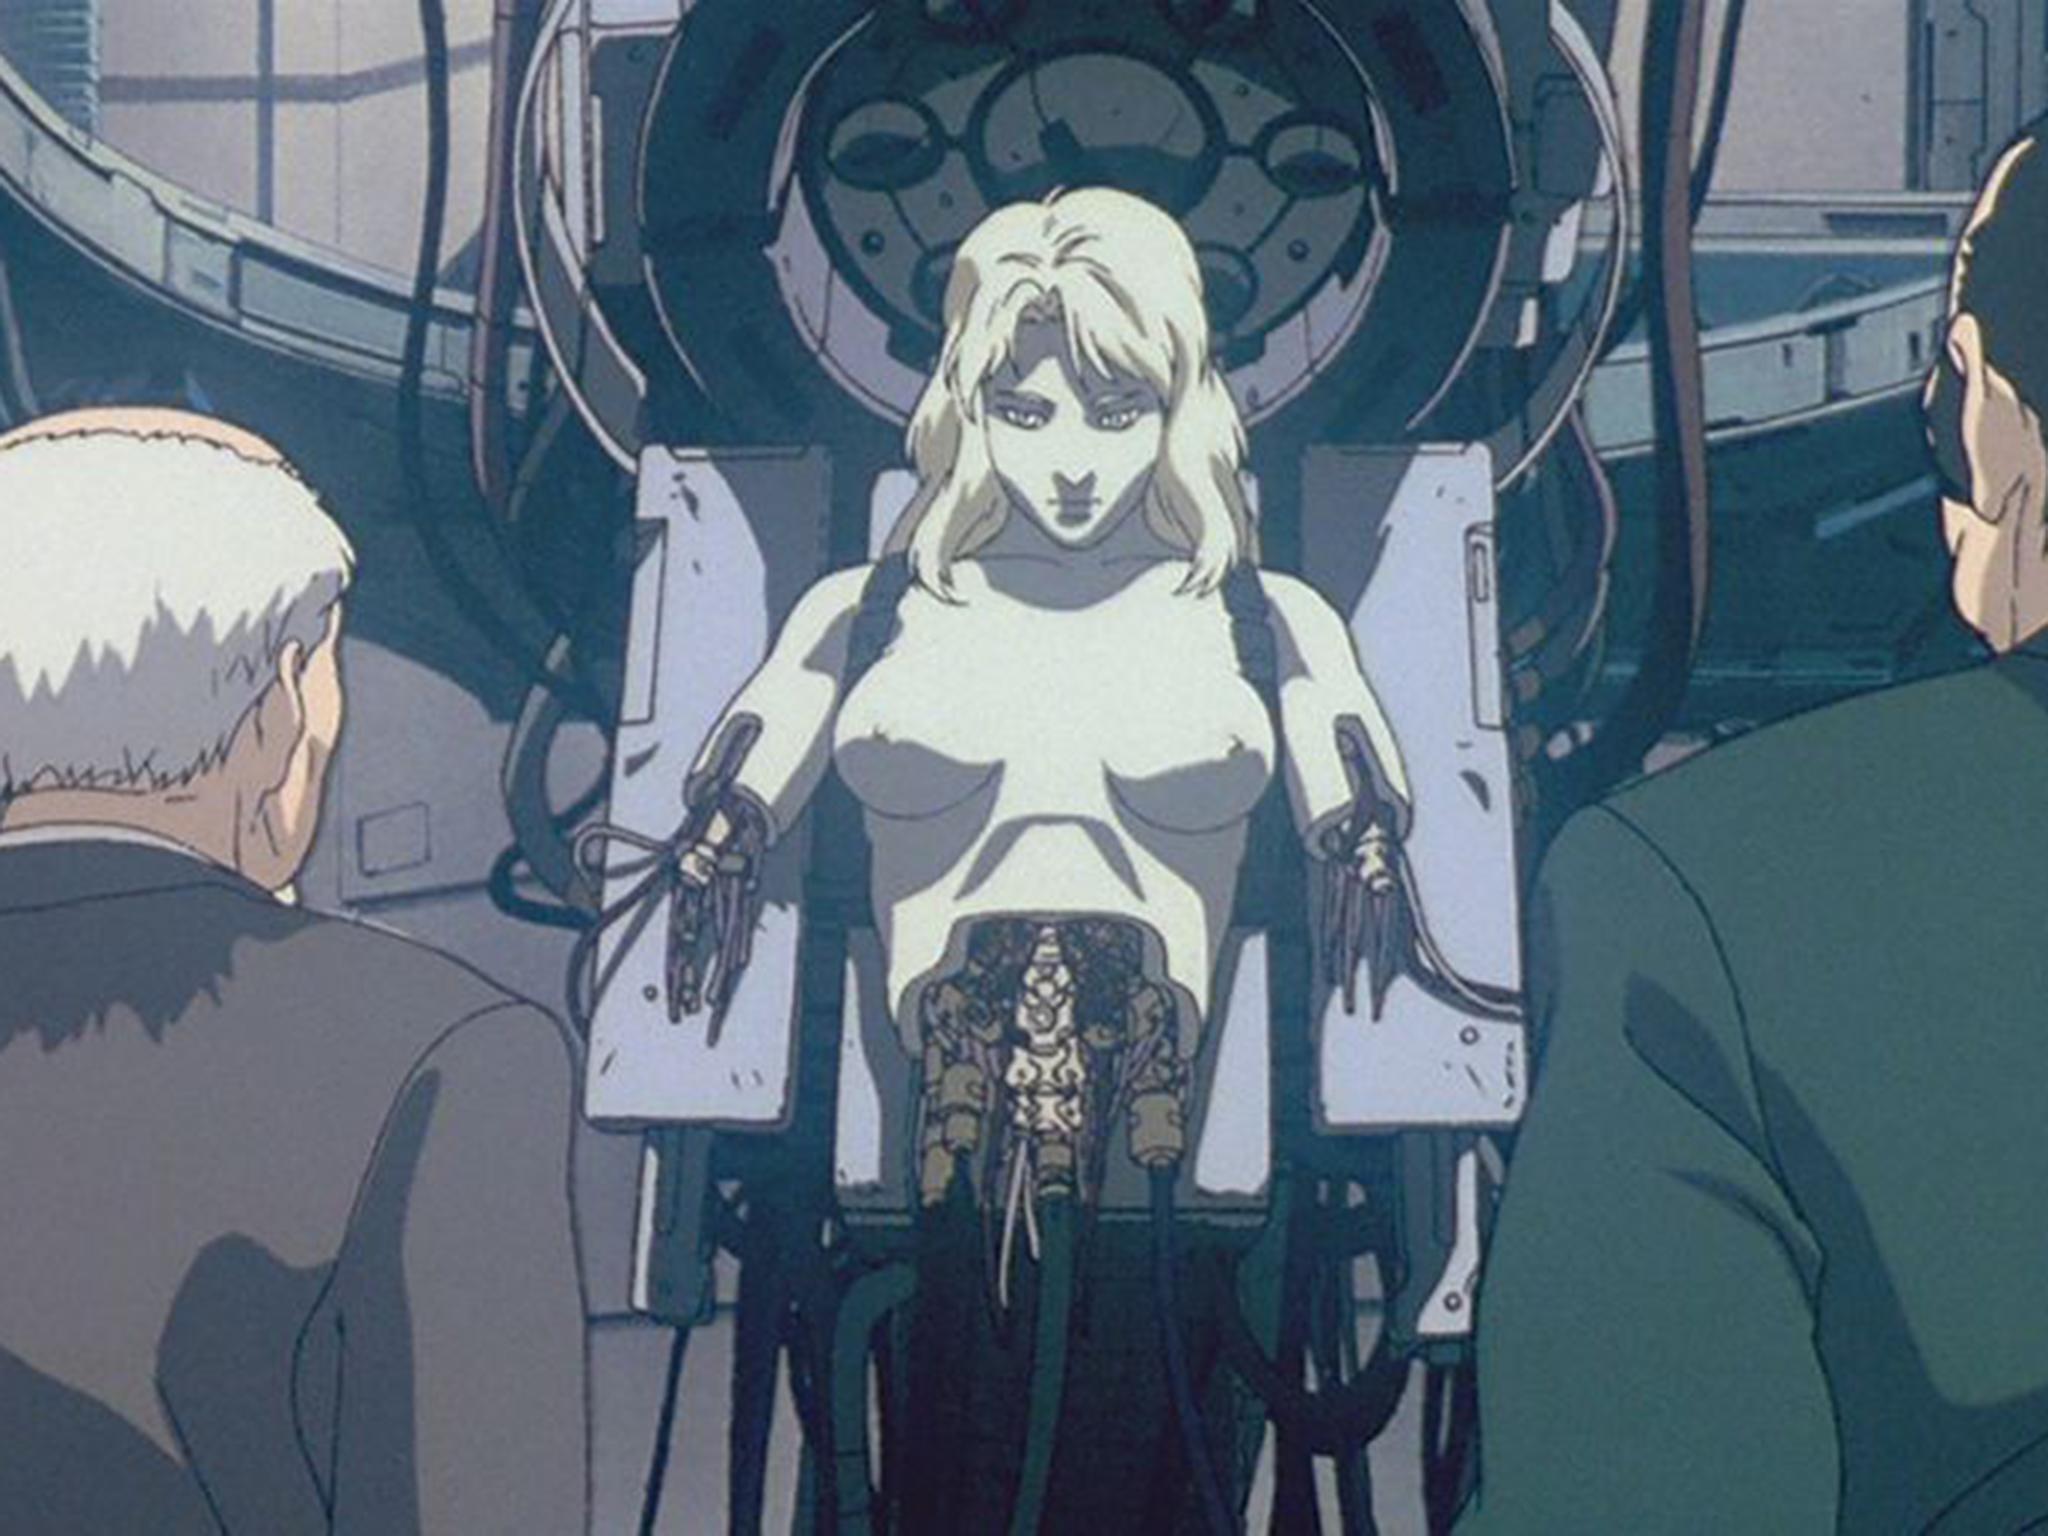 ghost in the shell 95 vs 17